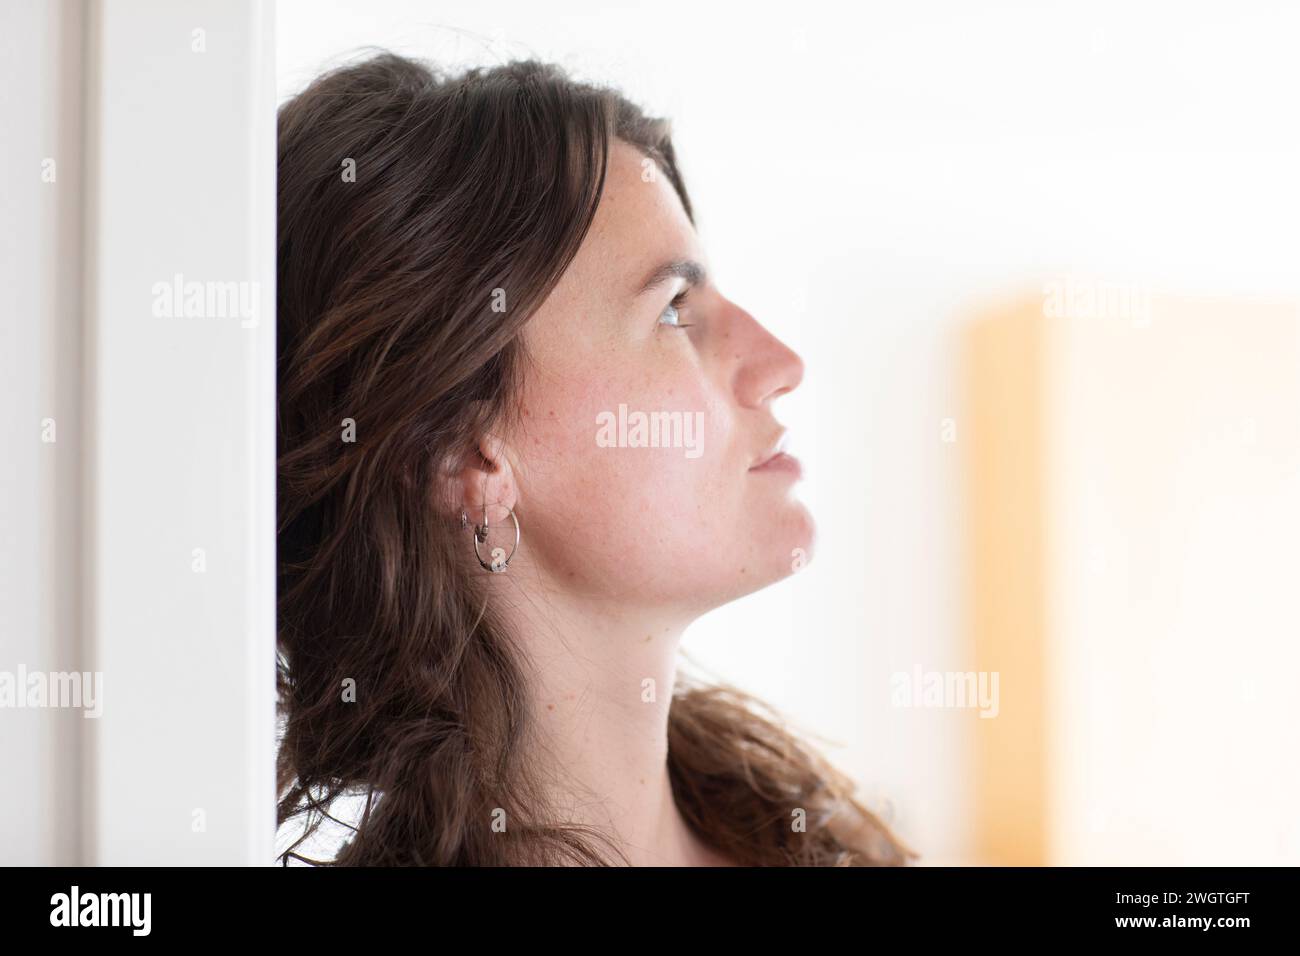 Young woman sitting at home, profile view Stock Photo